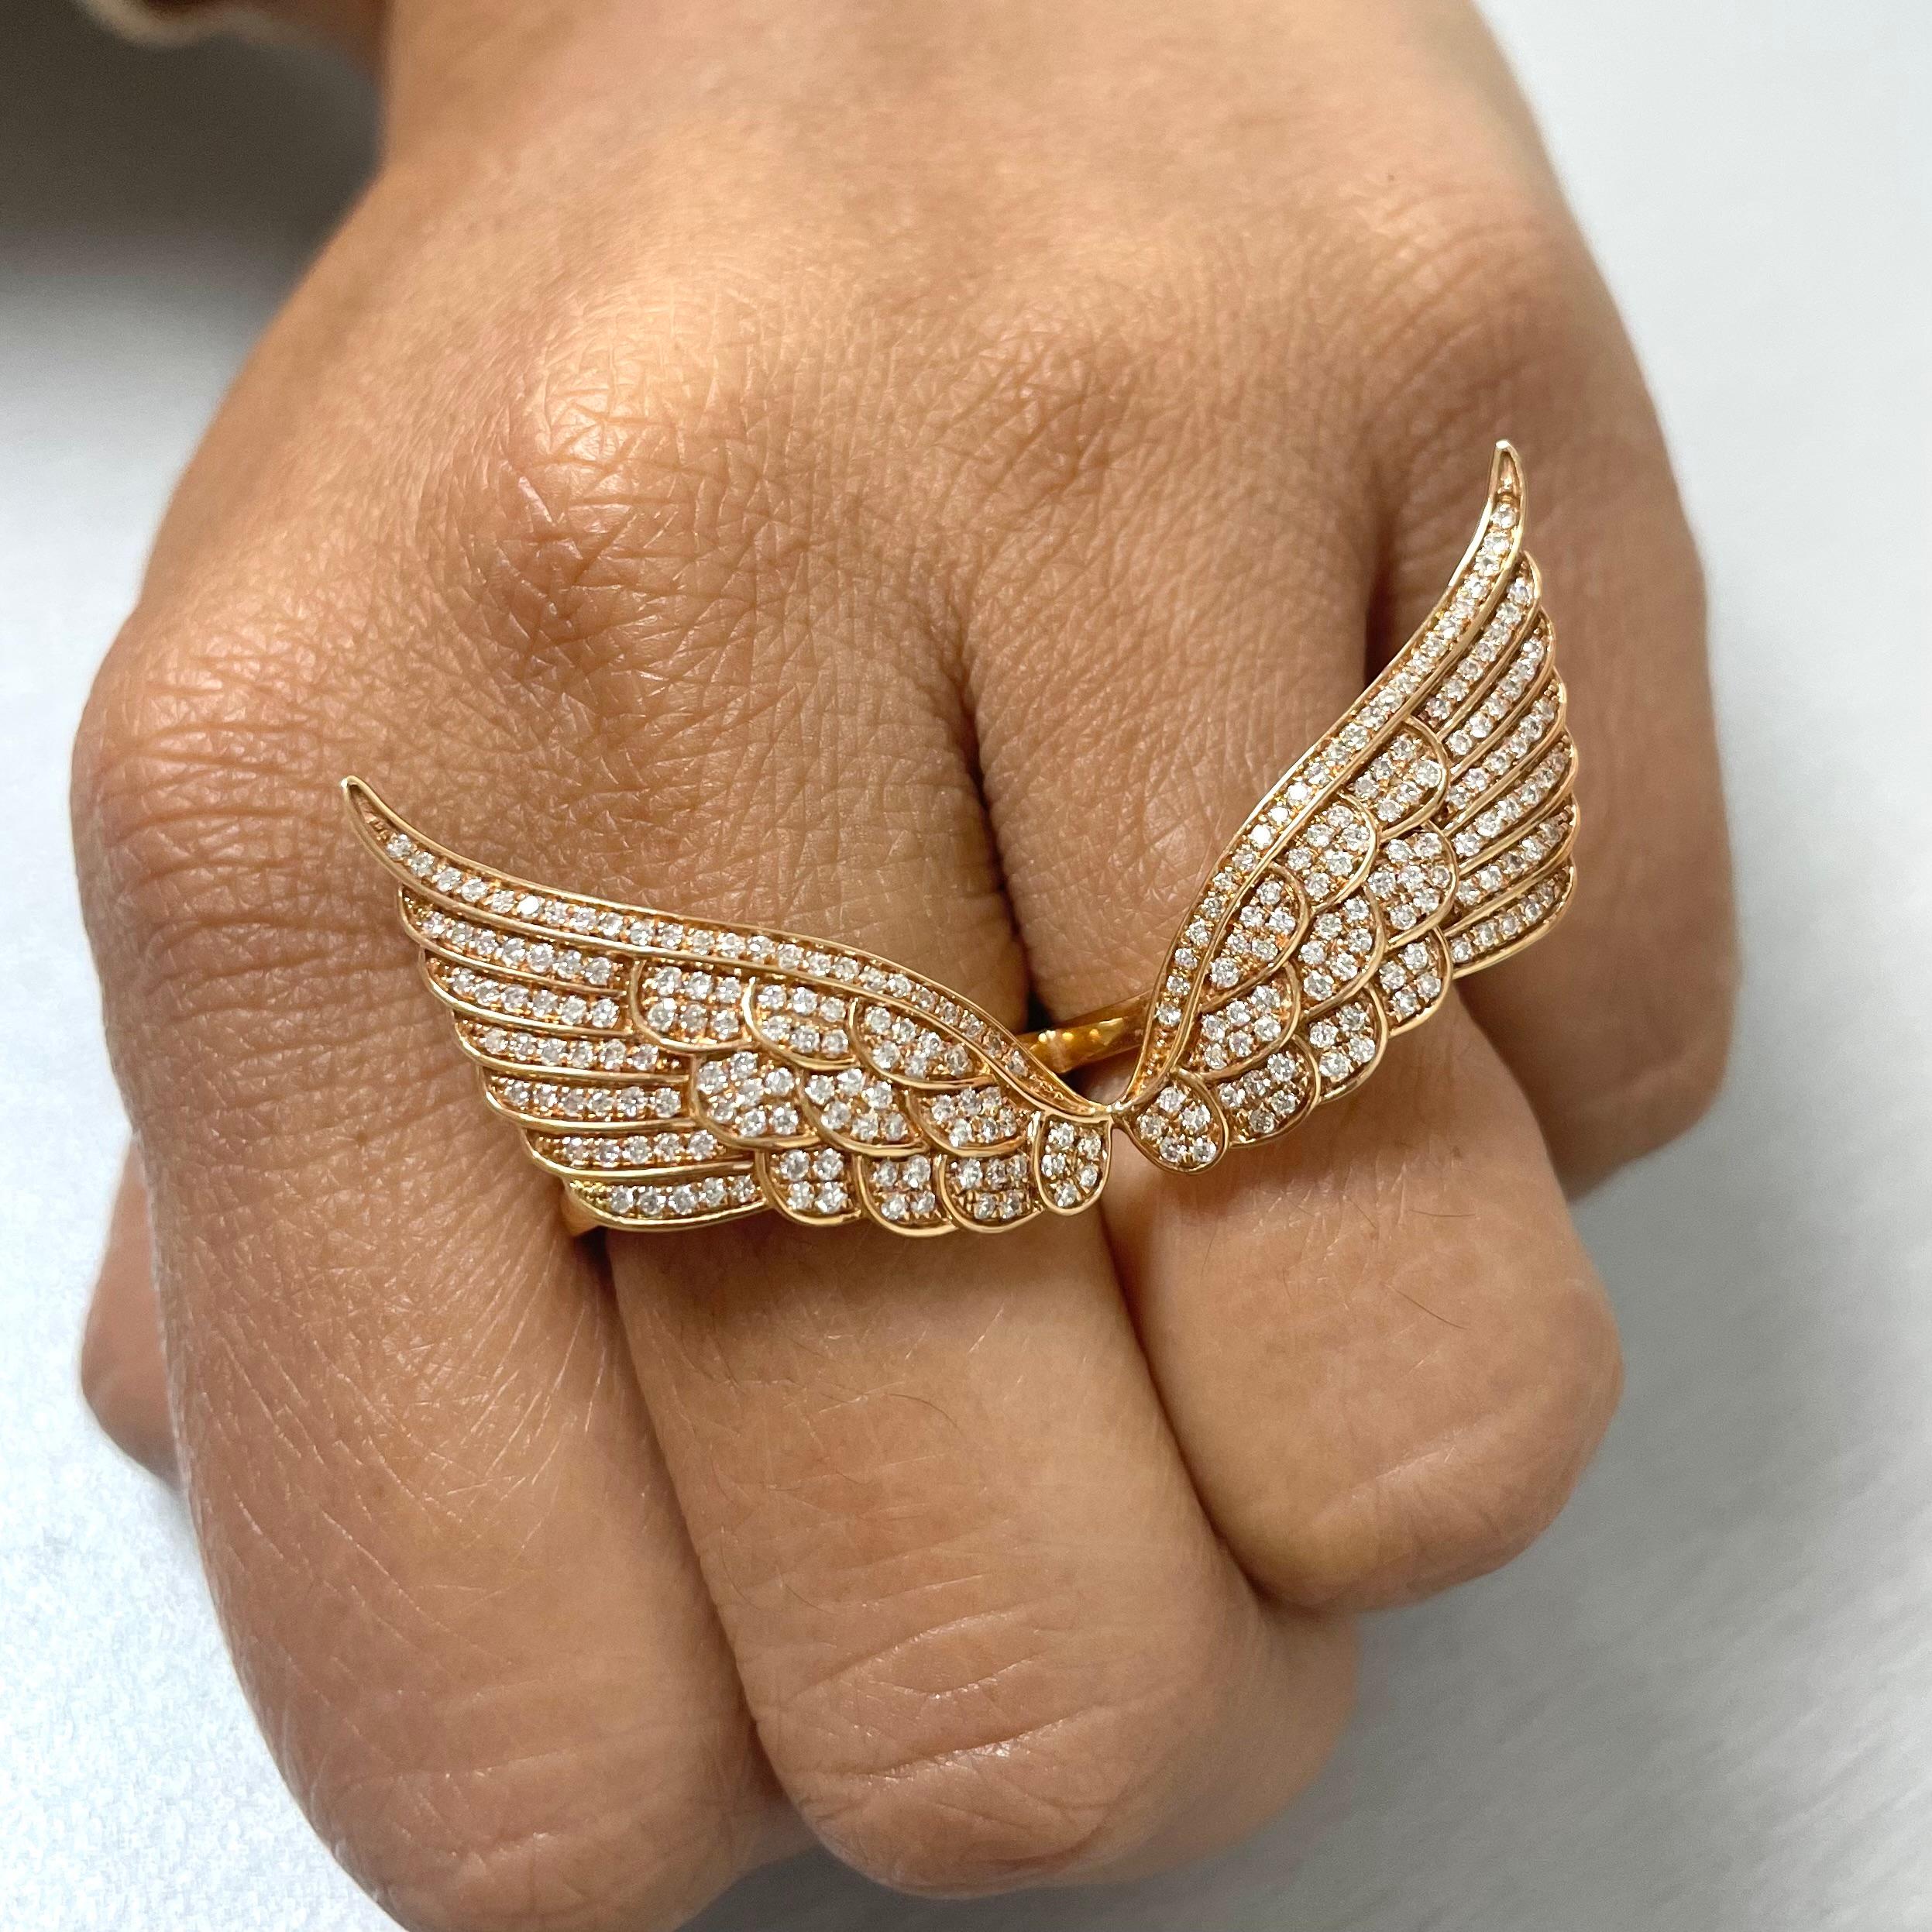 The Diamond and Rose Gold Wings Ring is a cool and funky expression of style and playfulness.

Diamonds Shape: Round
Diamonds Weight: 0.86 ct 
Diamond Color: G - H
Diamond Clarity: VS - SI (Very Slightly Included - Slightly Included) 

Metal: 18K